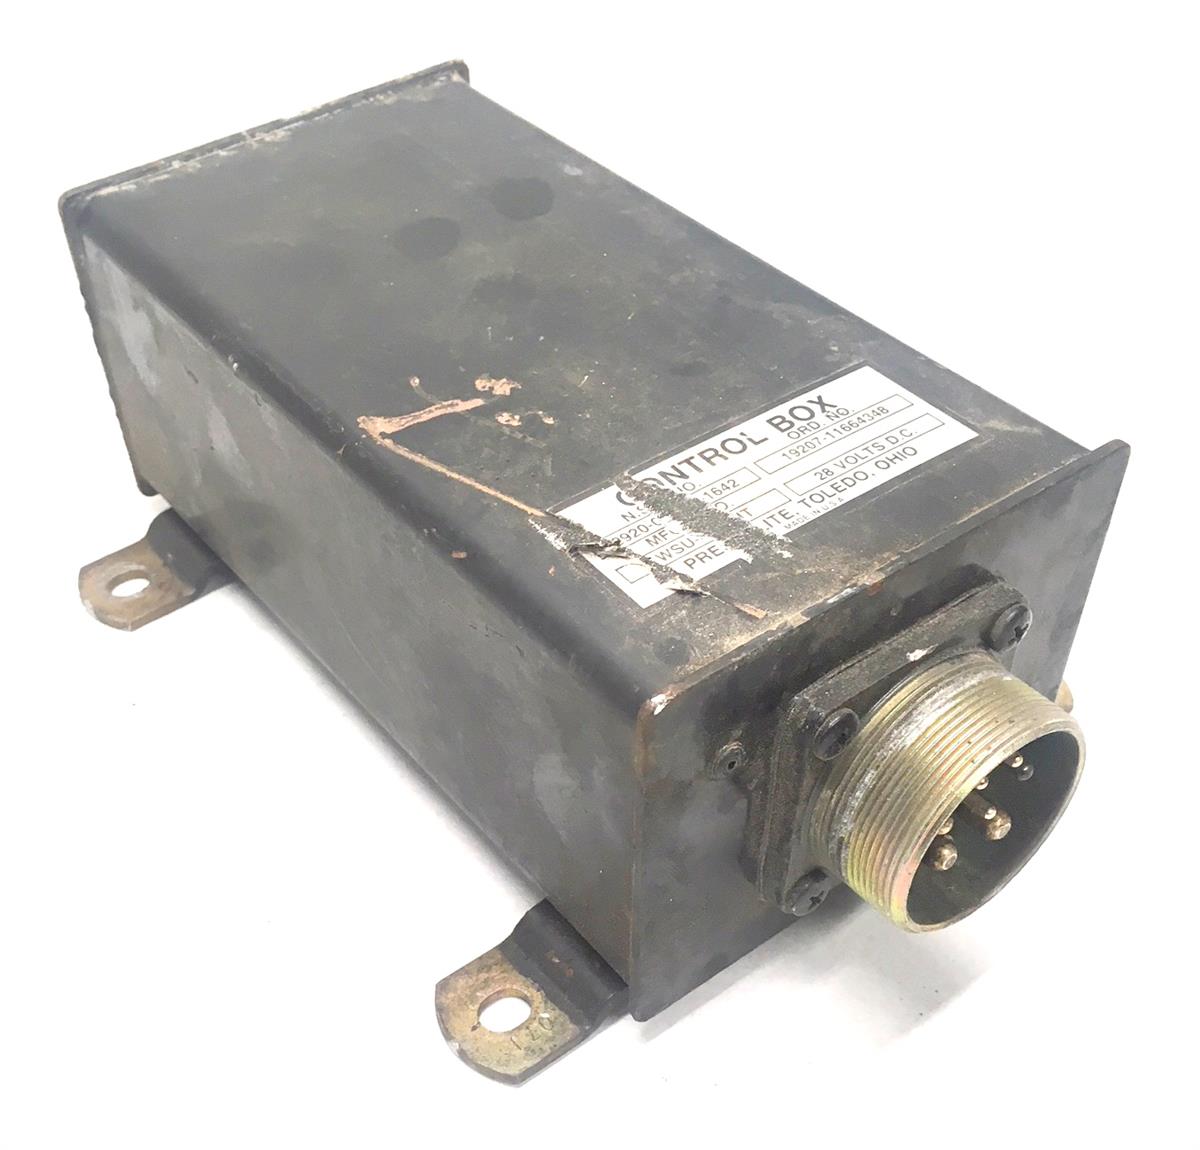 5T-504 | 5T-504 Electrical Power Control Box (USED) (2).JPG